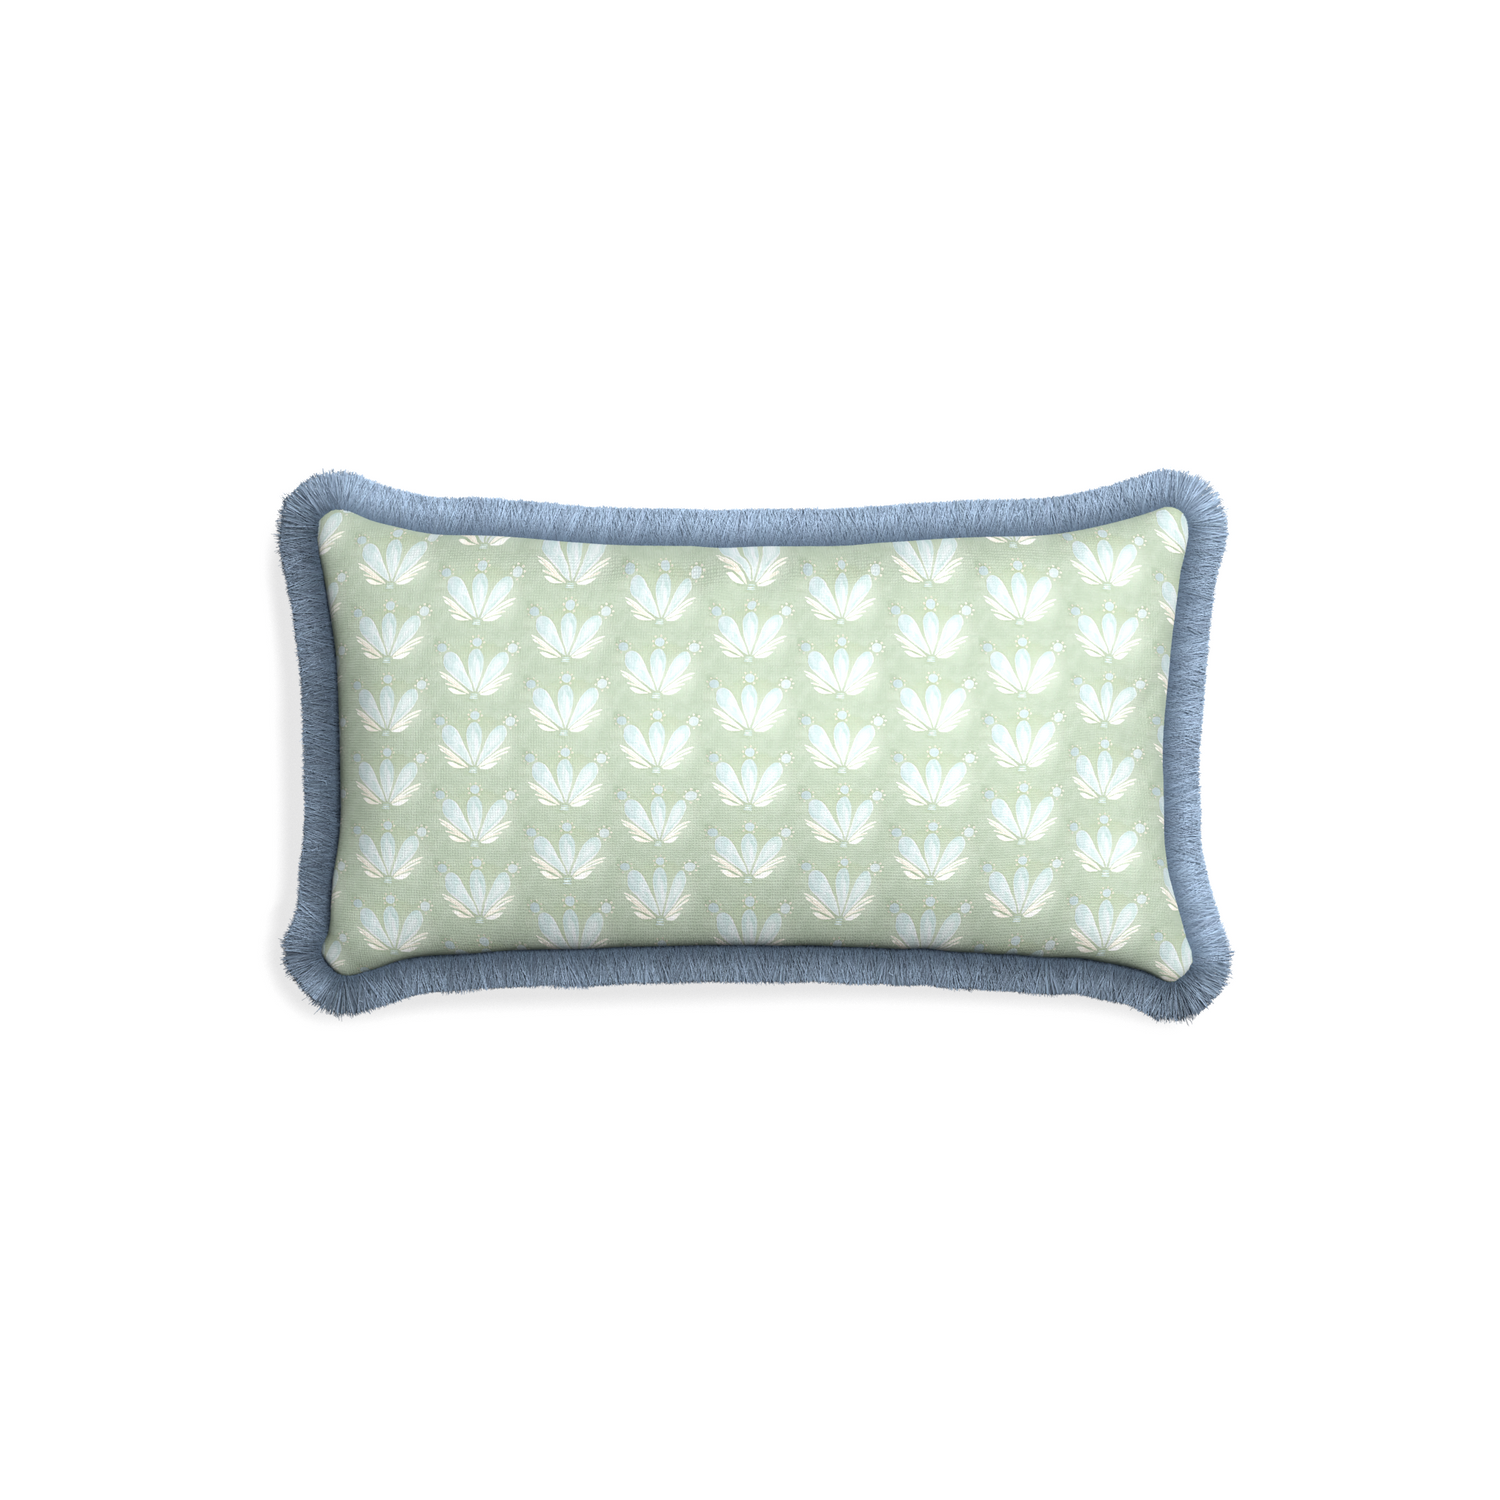 Petite-lumbar serena sea salt custom blue & green floral drop repeatpillow with sky fringe on white background